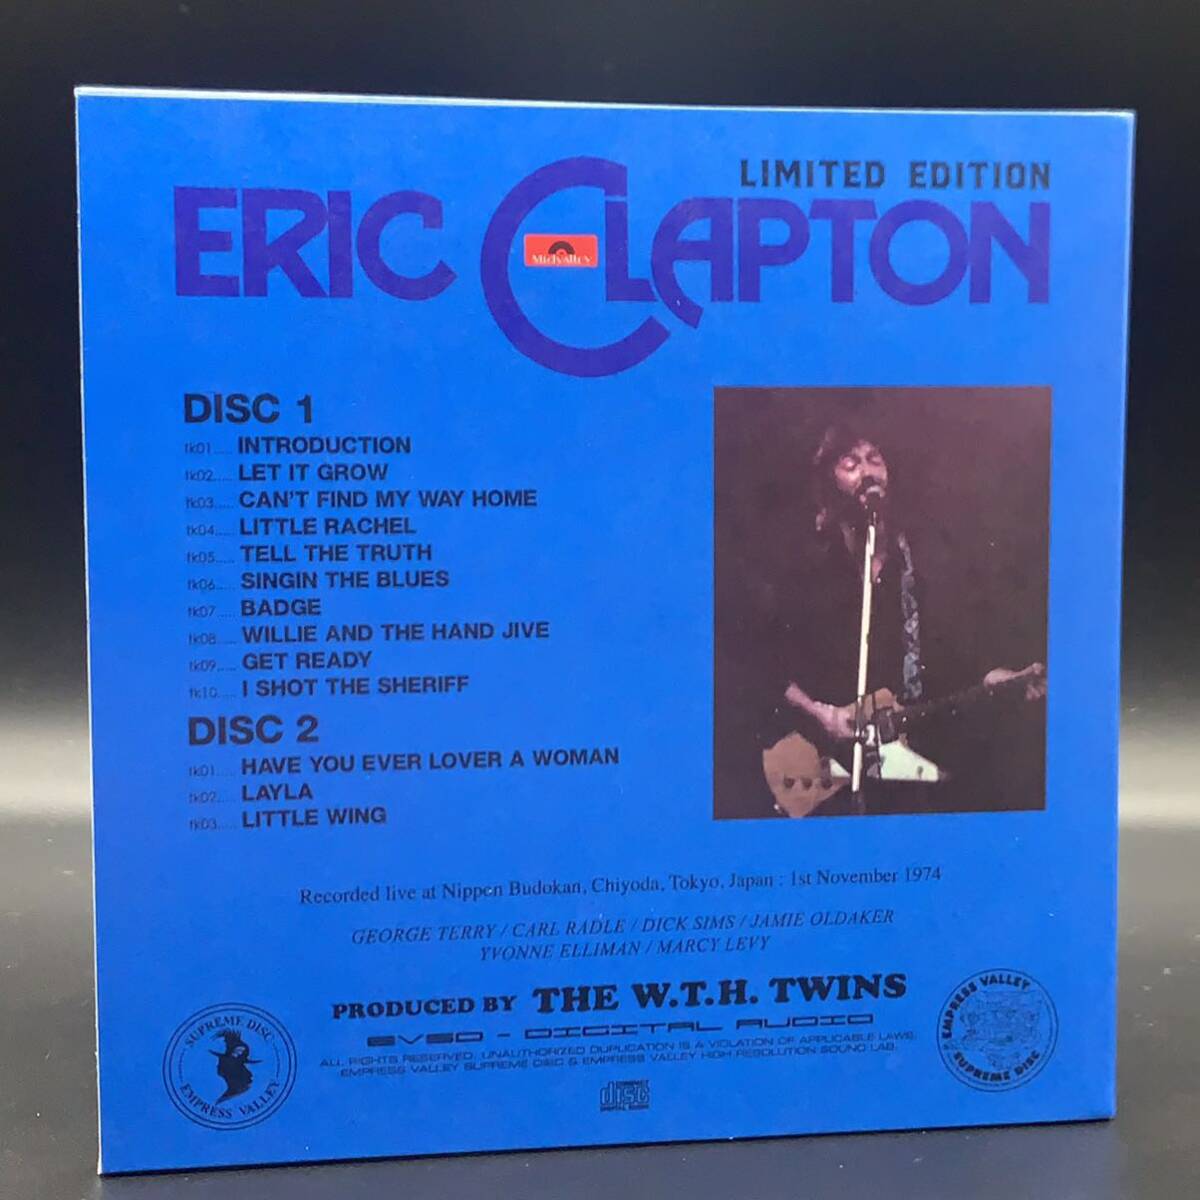 ERIC CLAPTON / TROPICAL SOUND SHOWER「亜熱帯武道館」(6CD BOX with Booklet) 初来日武道館3公演を全て初登場音源で収録！完売品！の画像6